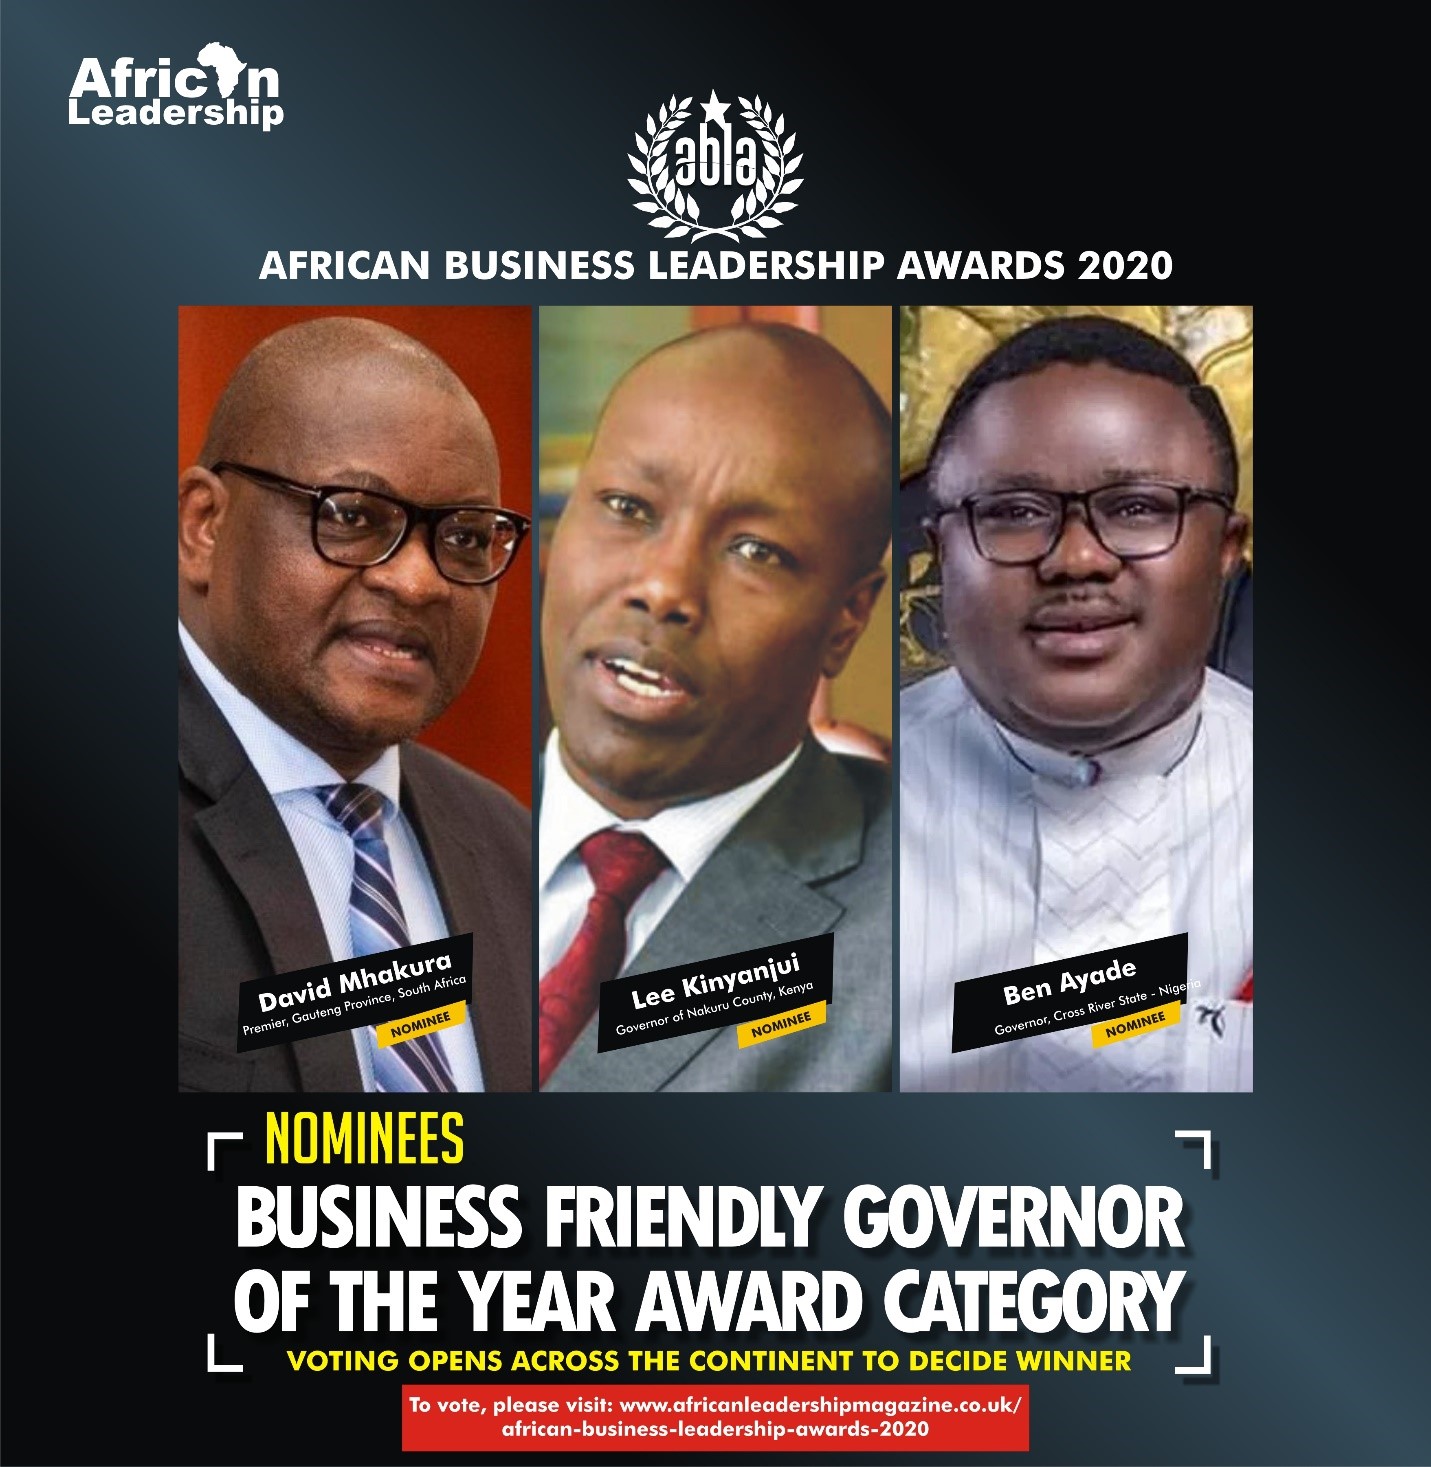 Nigeria’s Governor Ayade, 2 Others Contend for Business-Friendly Governor of the Year Award 2020